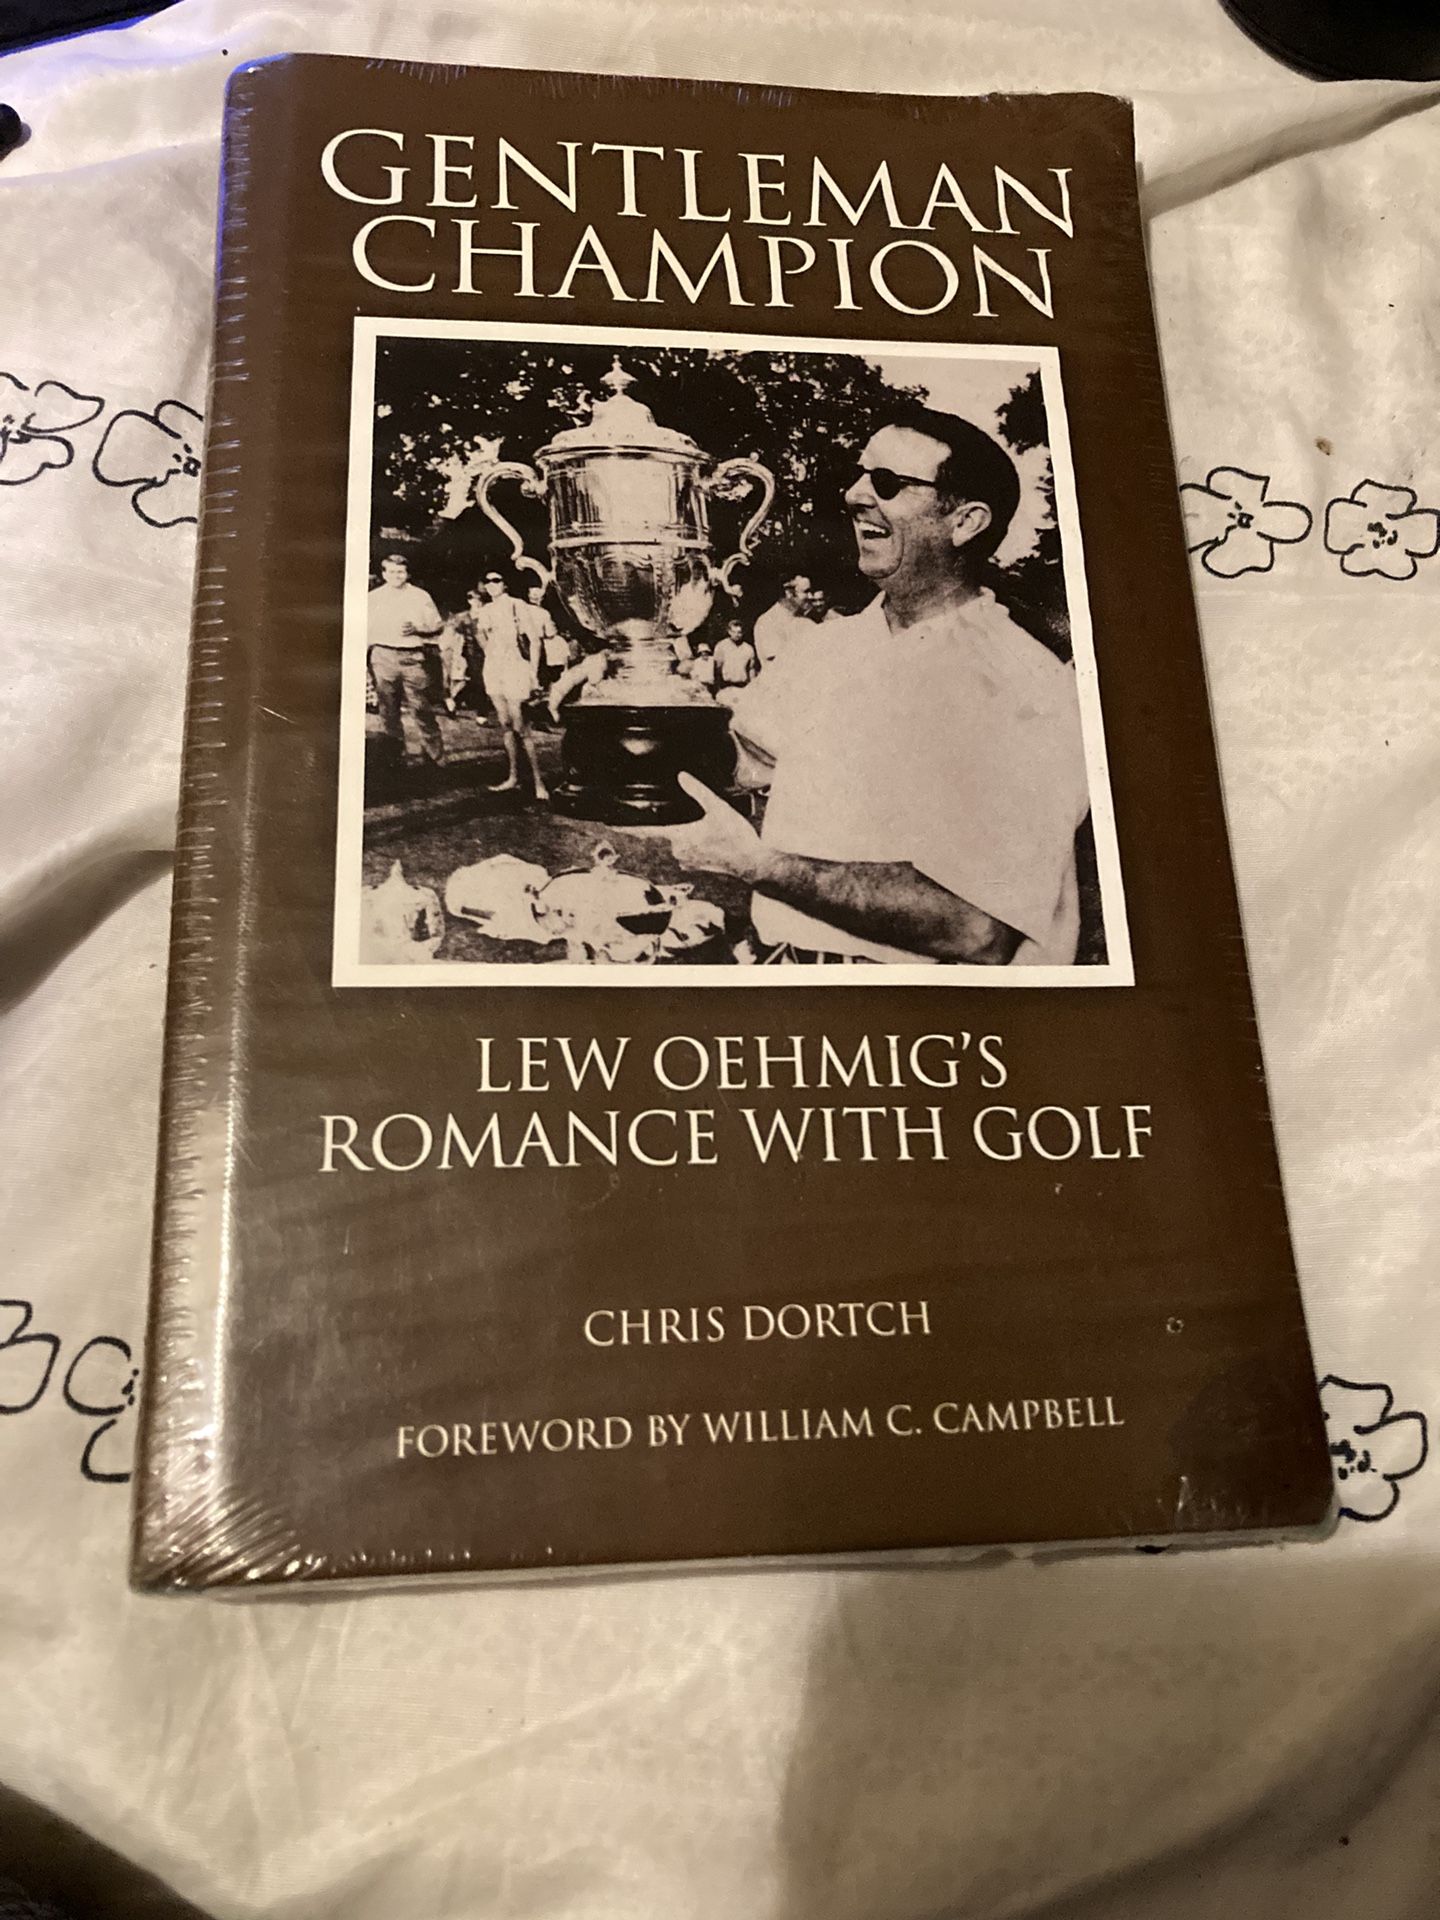 Gentleman Champion-Lew Oehmig’s Romance With Golf